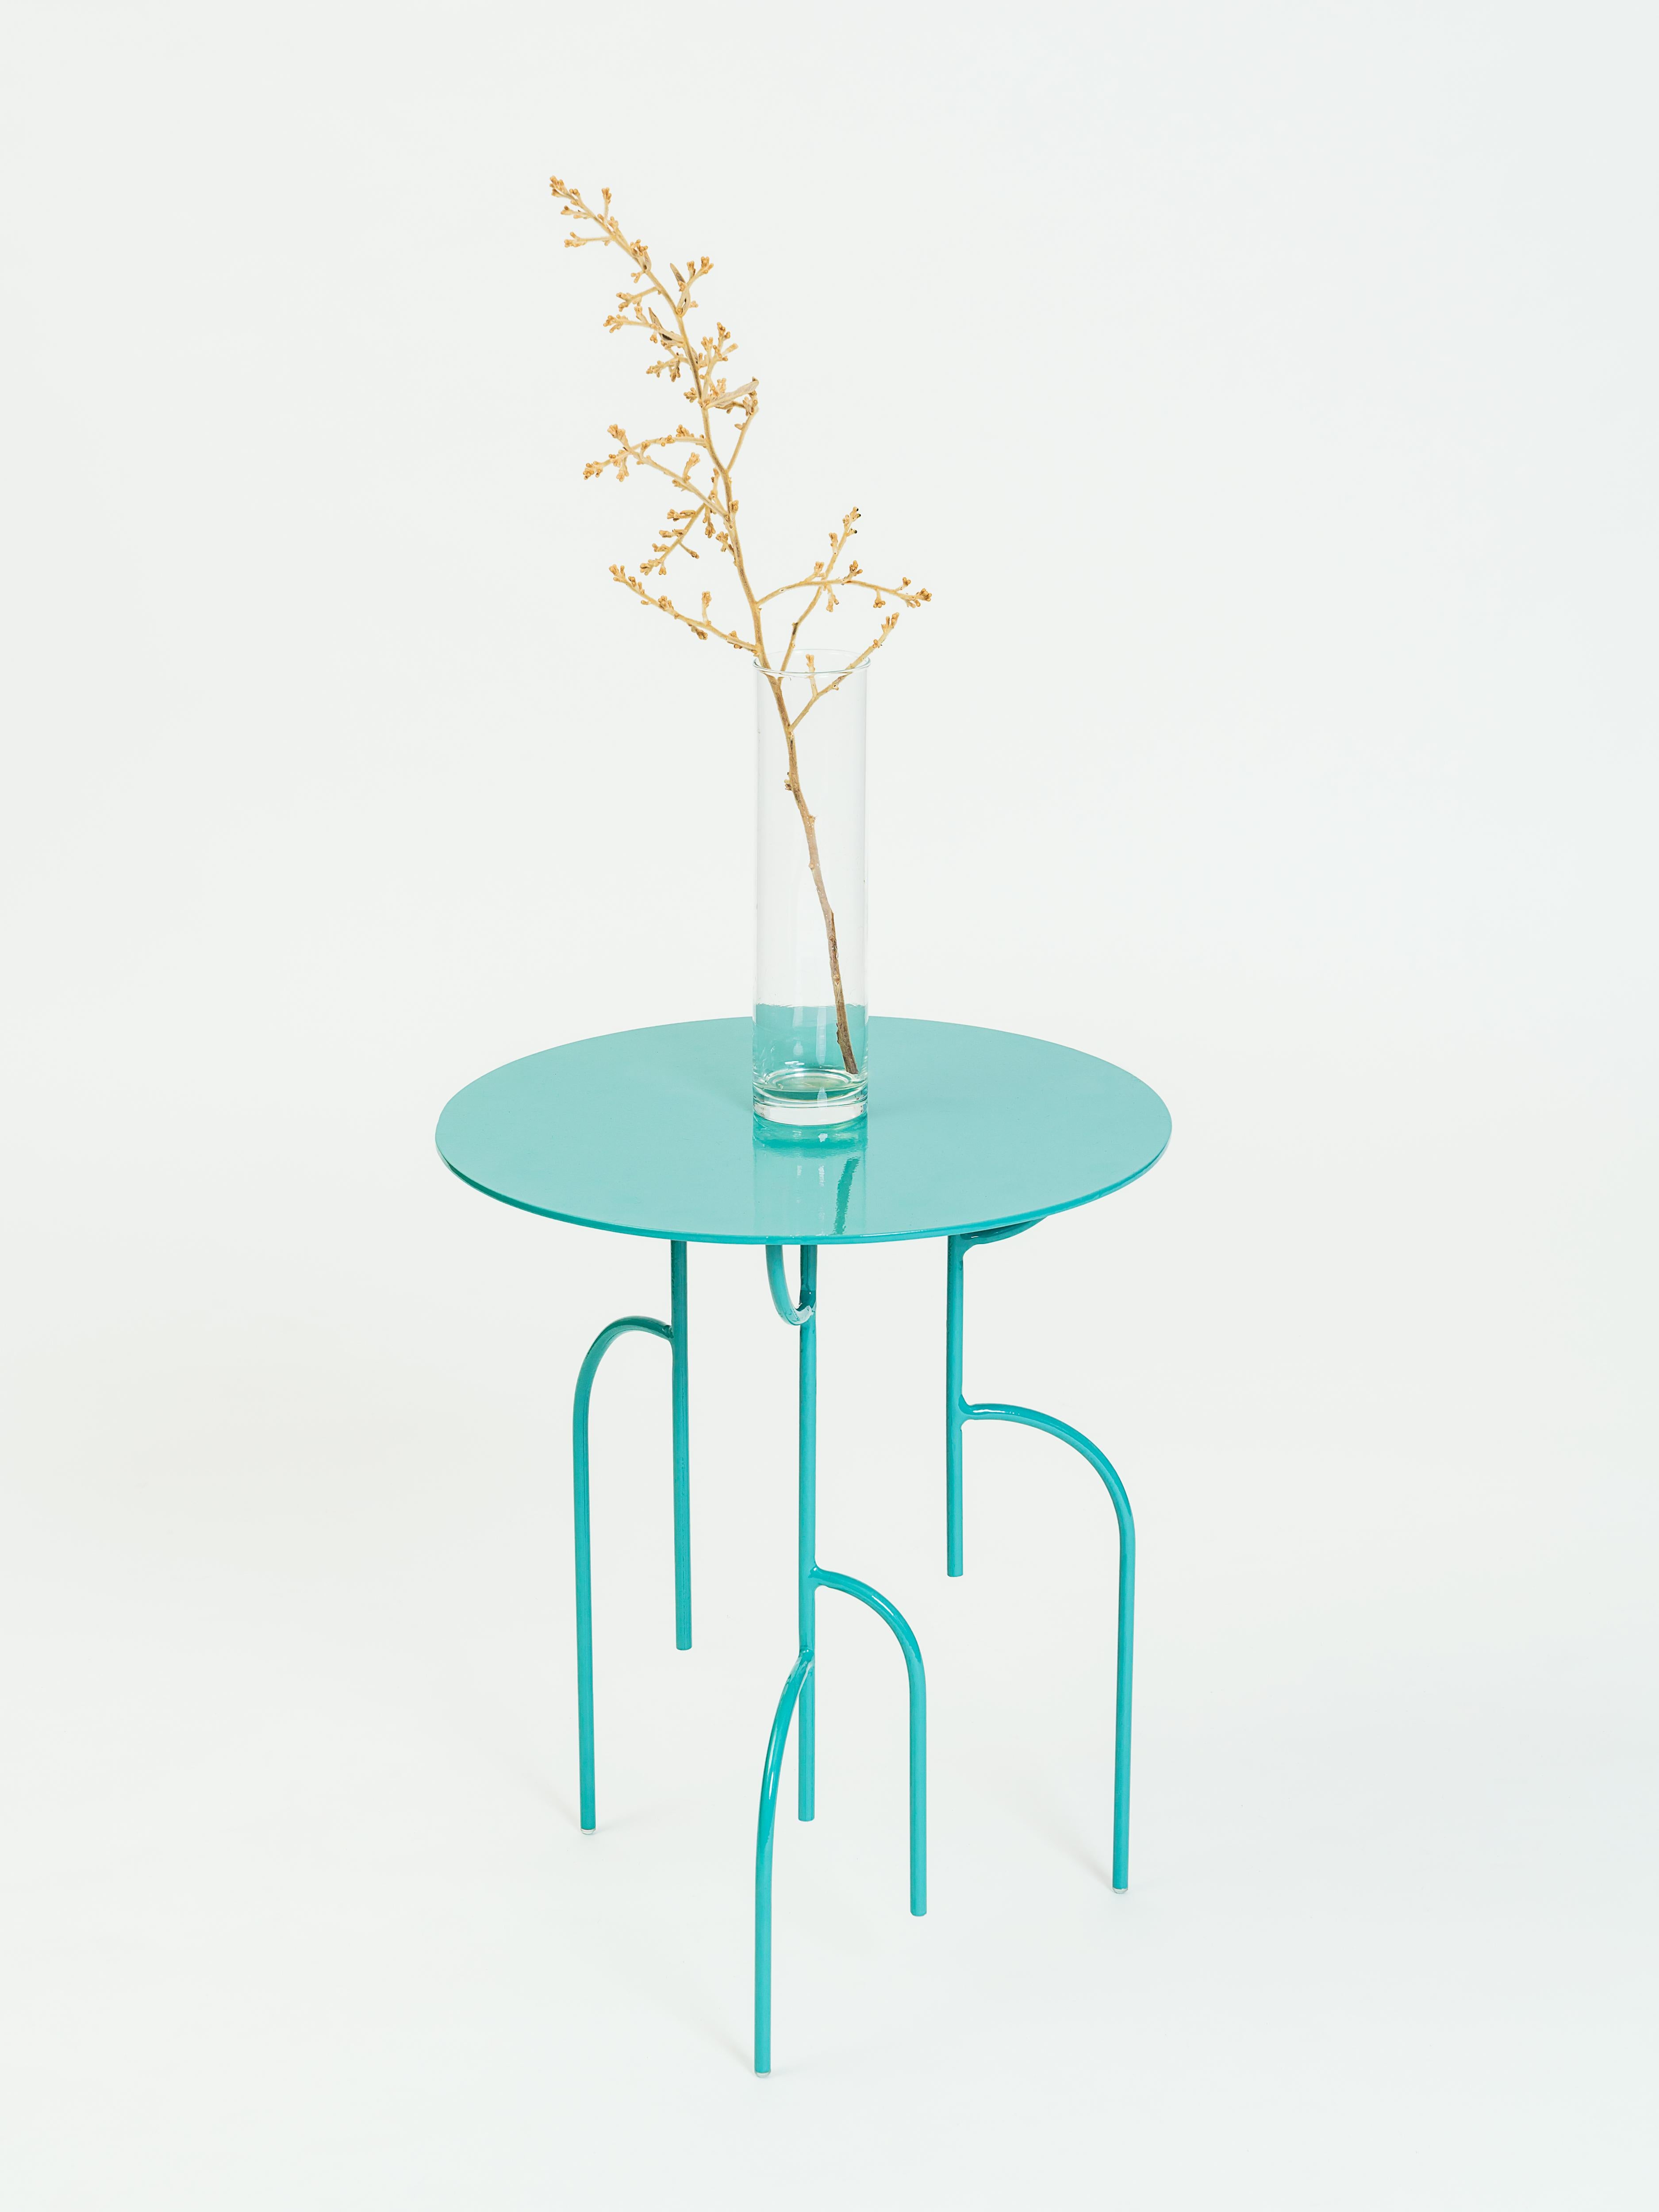 The Lagoas tables and lamp are inspired by the nature, it is an allusion to the mangrove trees and the way it deeps into the water.

The legs design plays with the senses of the observer by distorting the perspective and sense of distance. It is